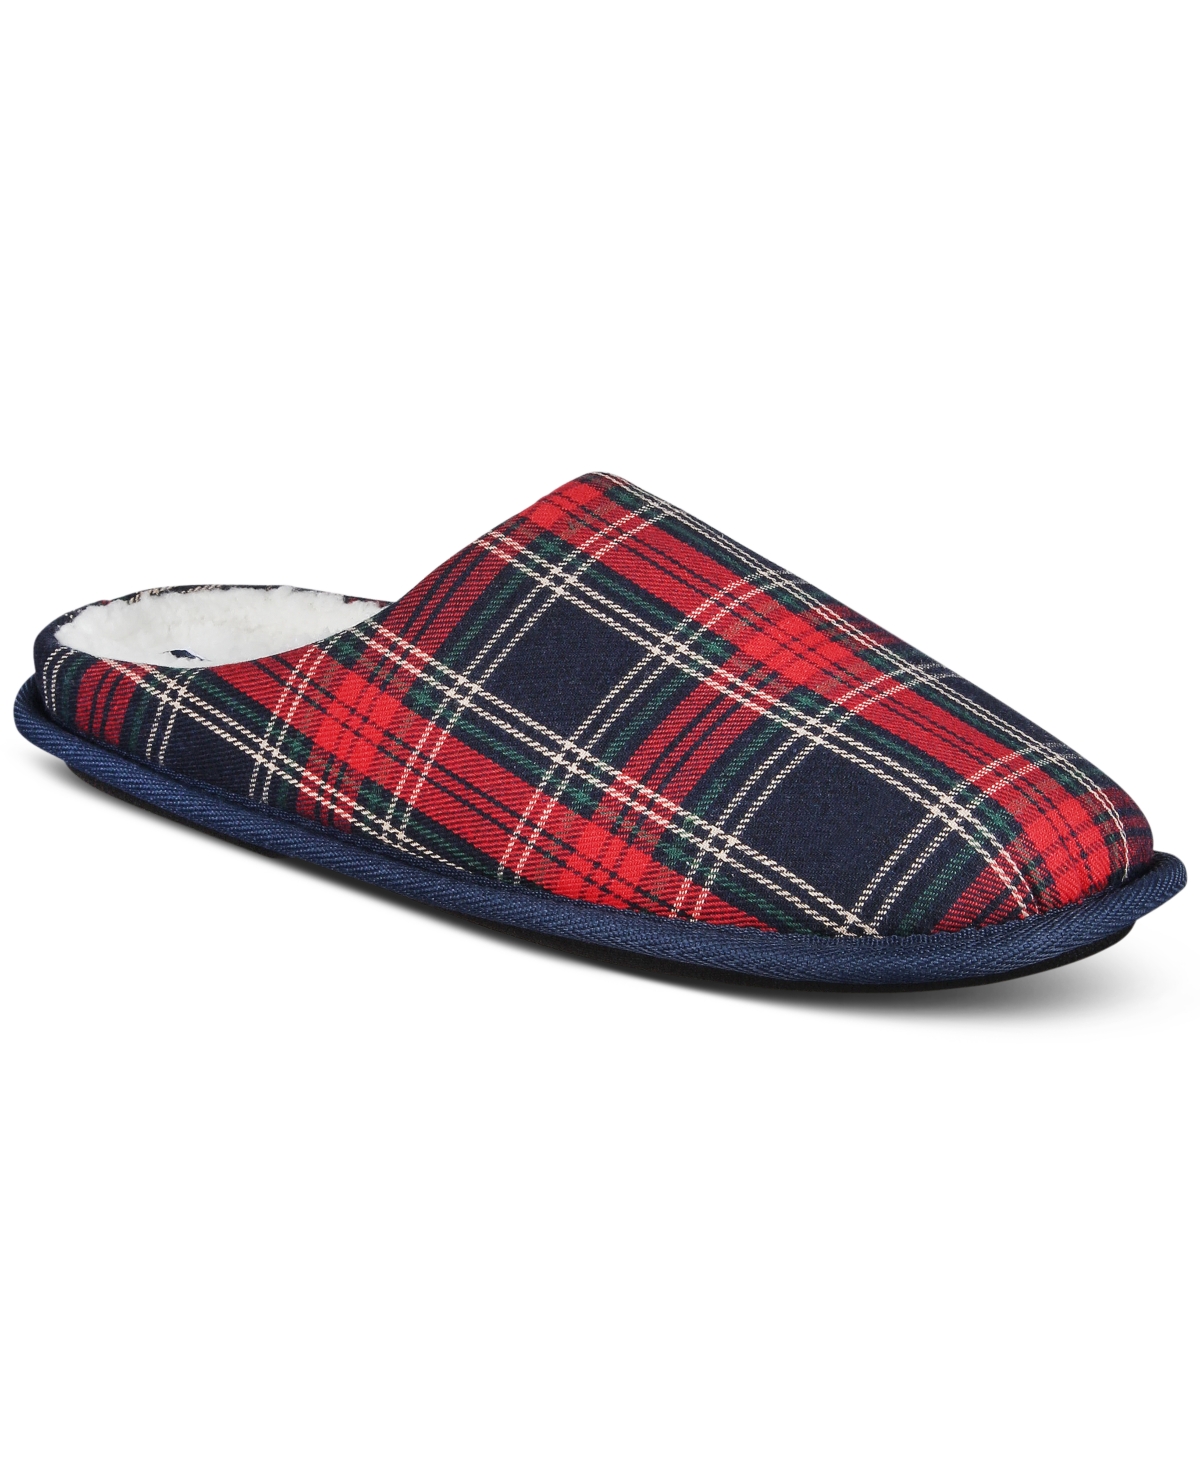 Club Room Men's Jake Plaid Slippers, Created for Macy's